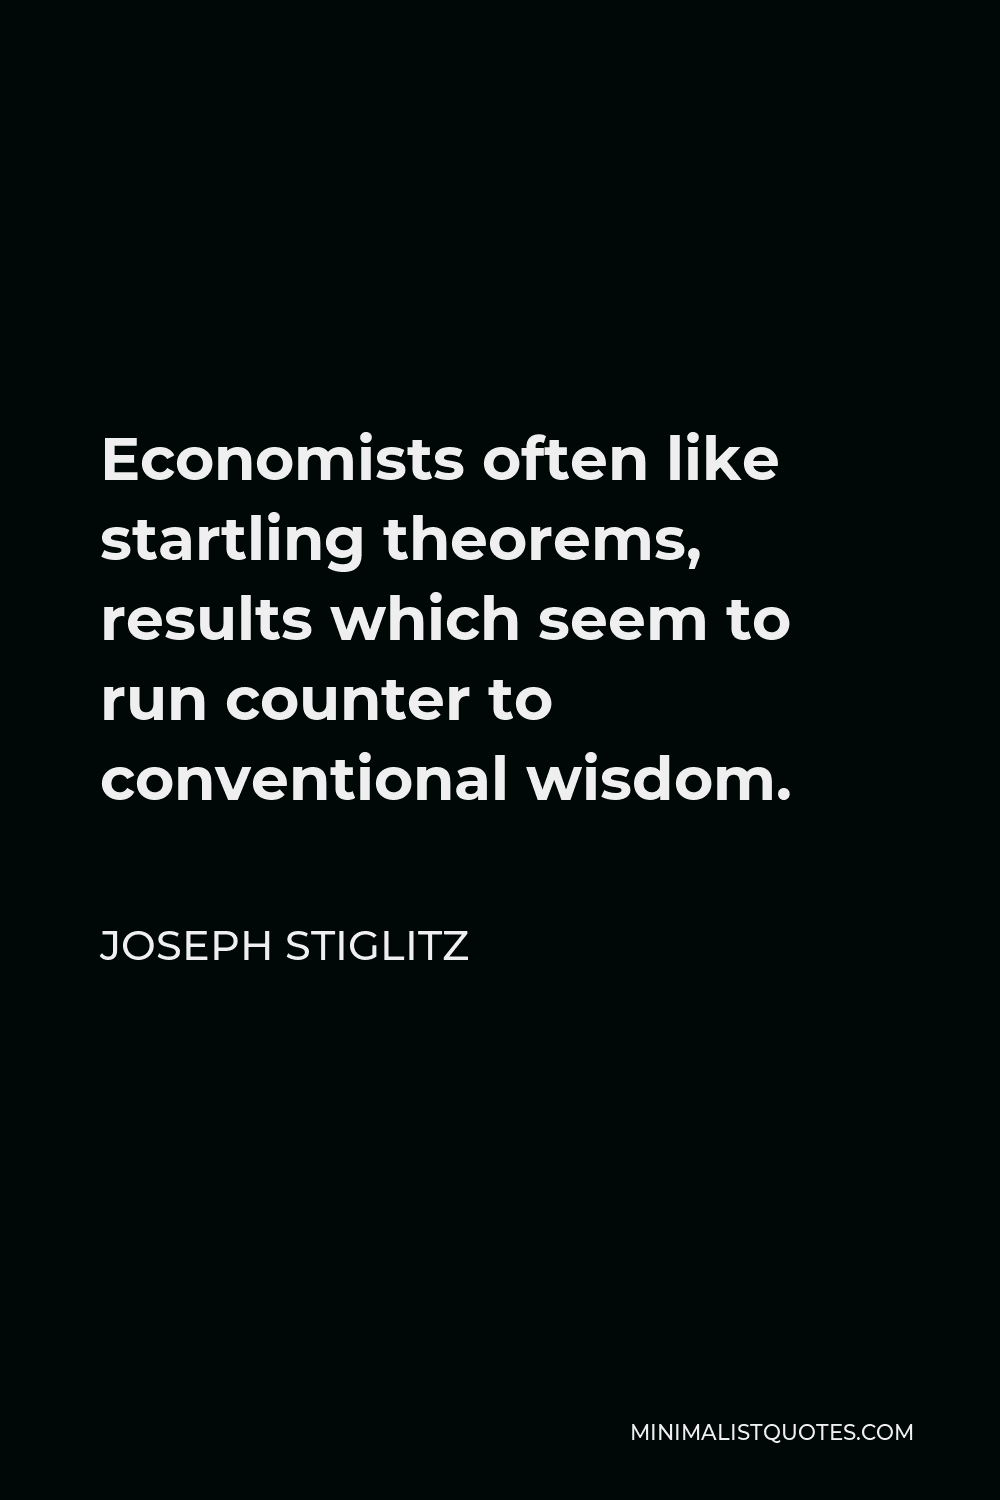 Joseph Stiglitz Quote - Economists often like startling theorems, results which seem to run counter to conventional wisdom.